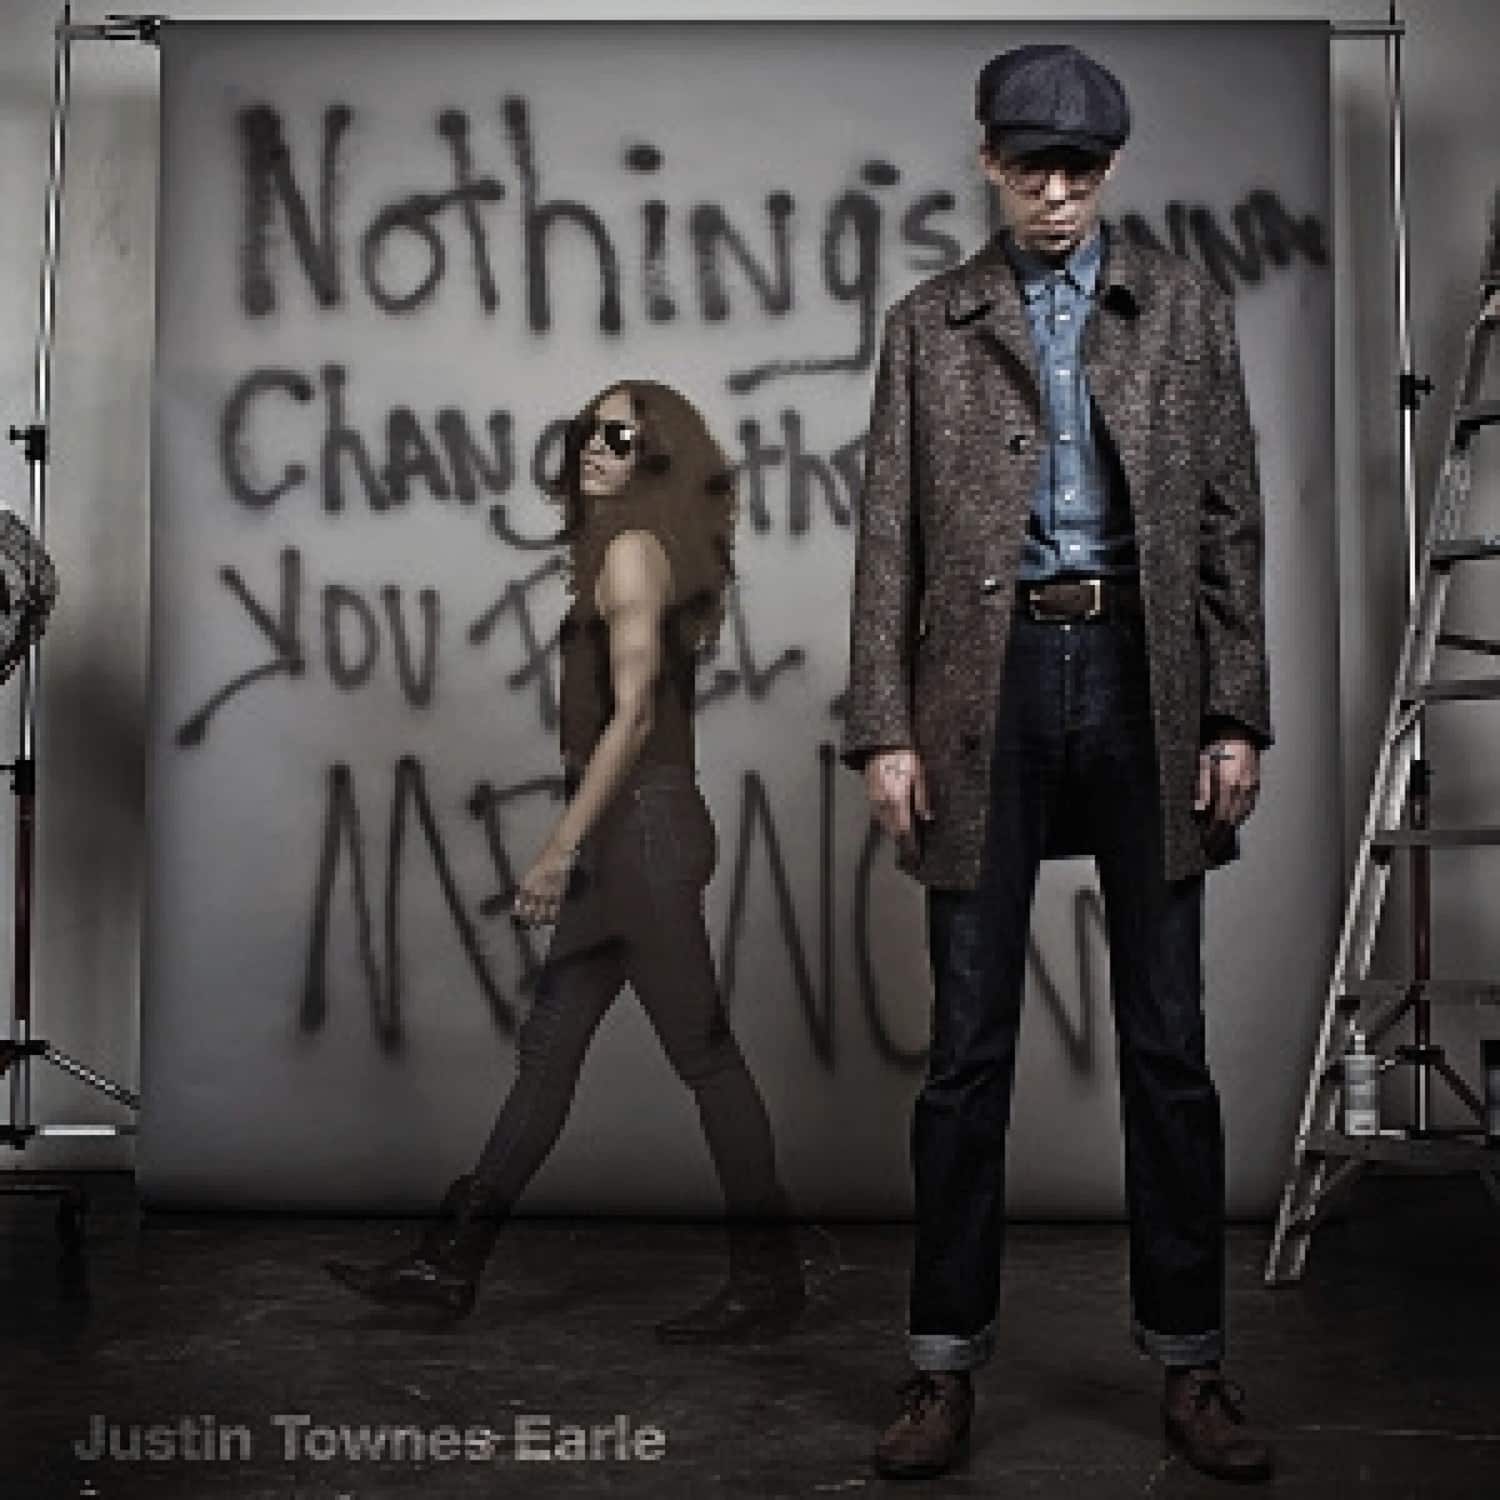 Justin Townes Earle - NOTHINGS GONNA CHANGE THE WAY 